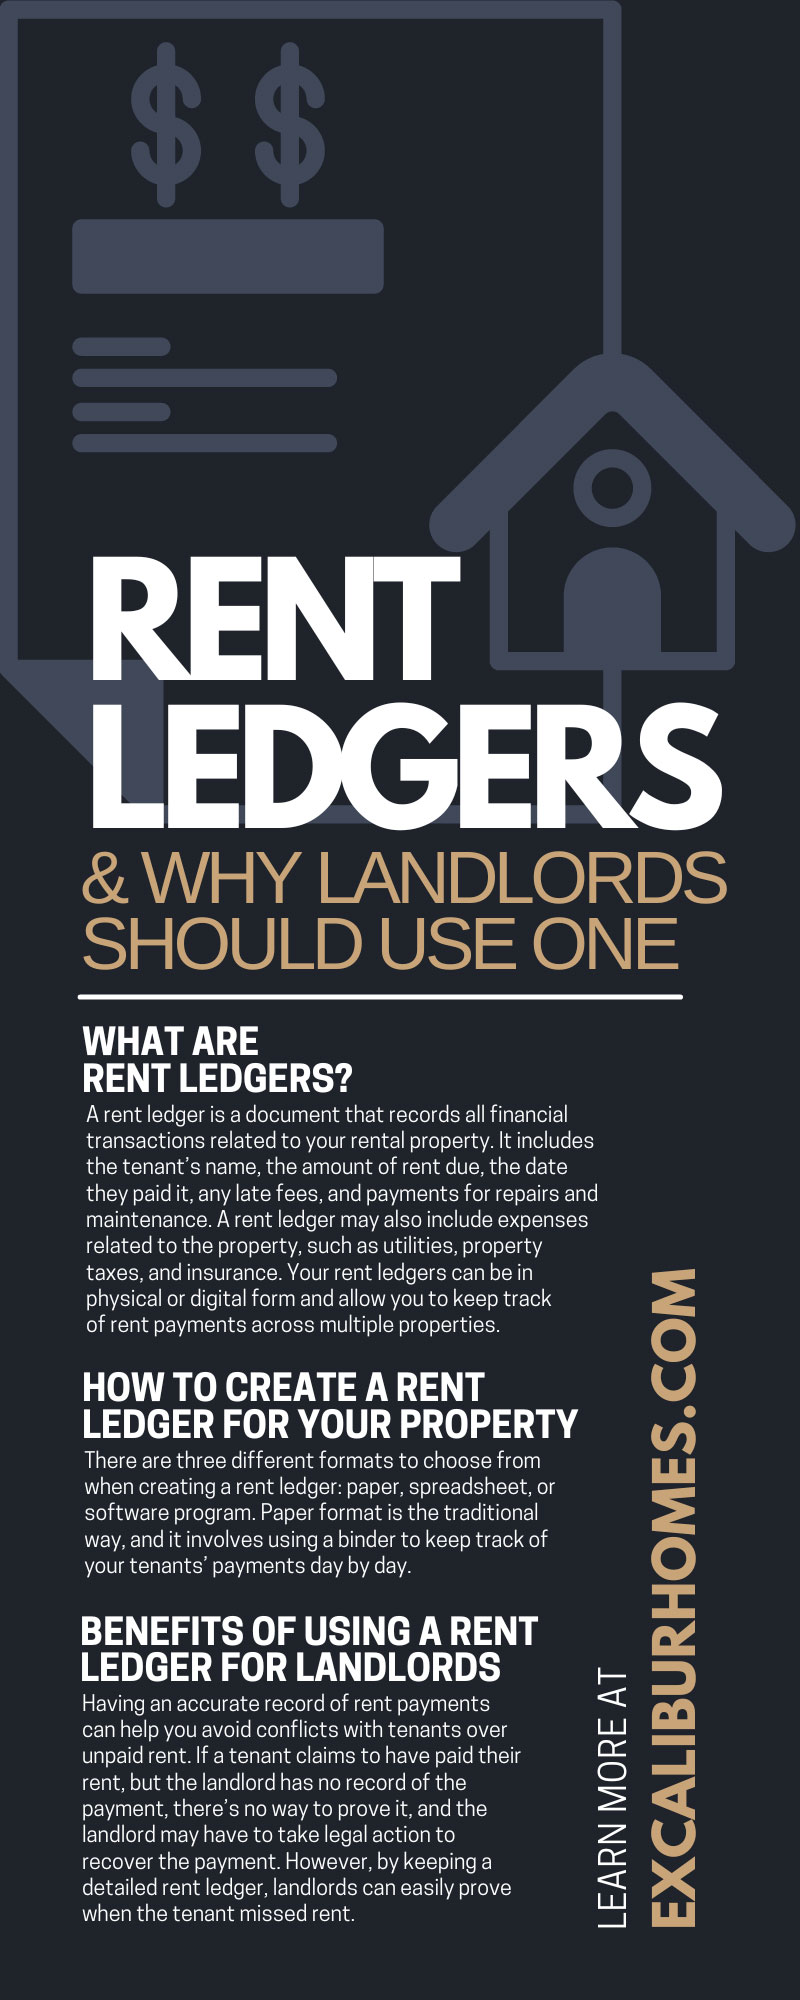 Rent Ledgers & Why Landlords Should Use One